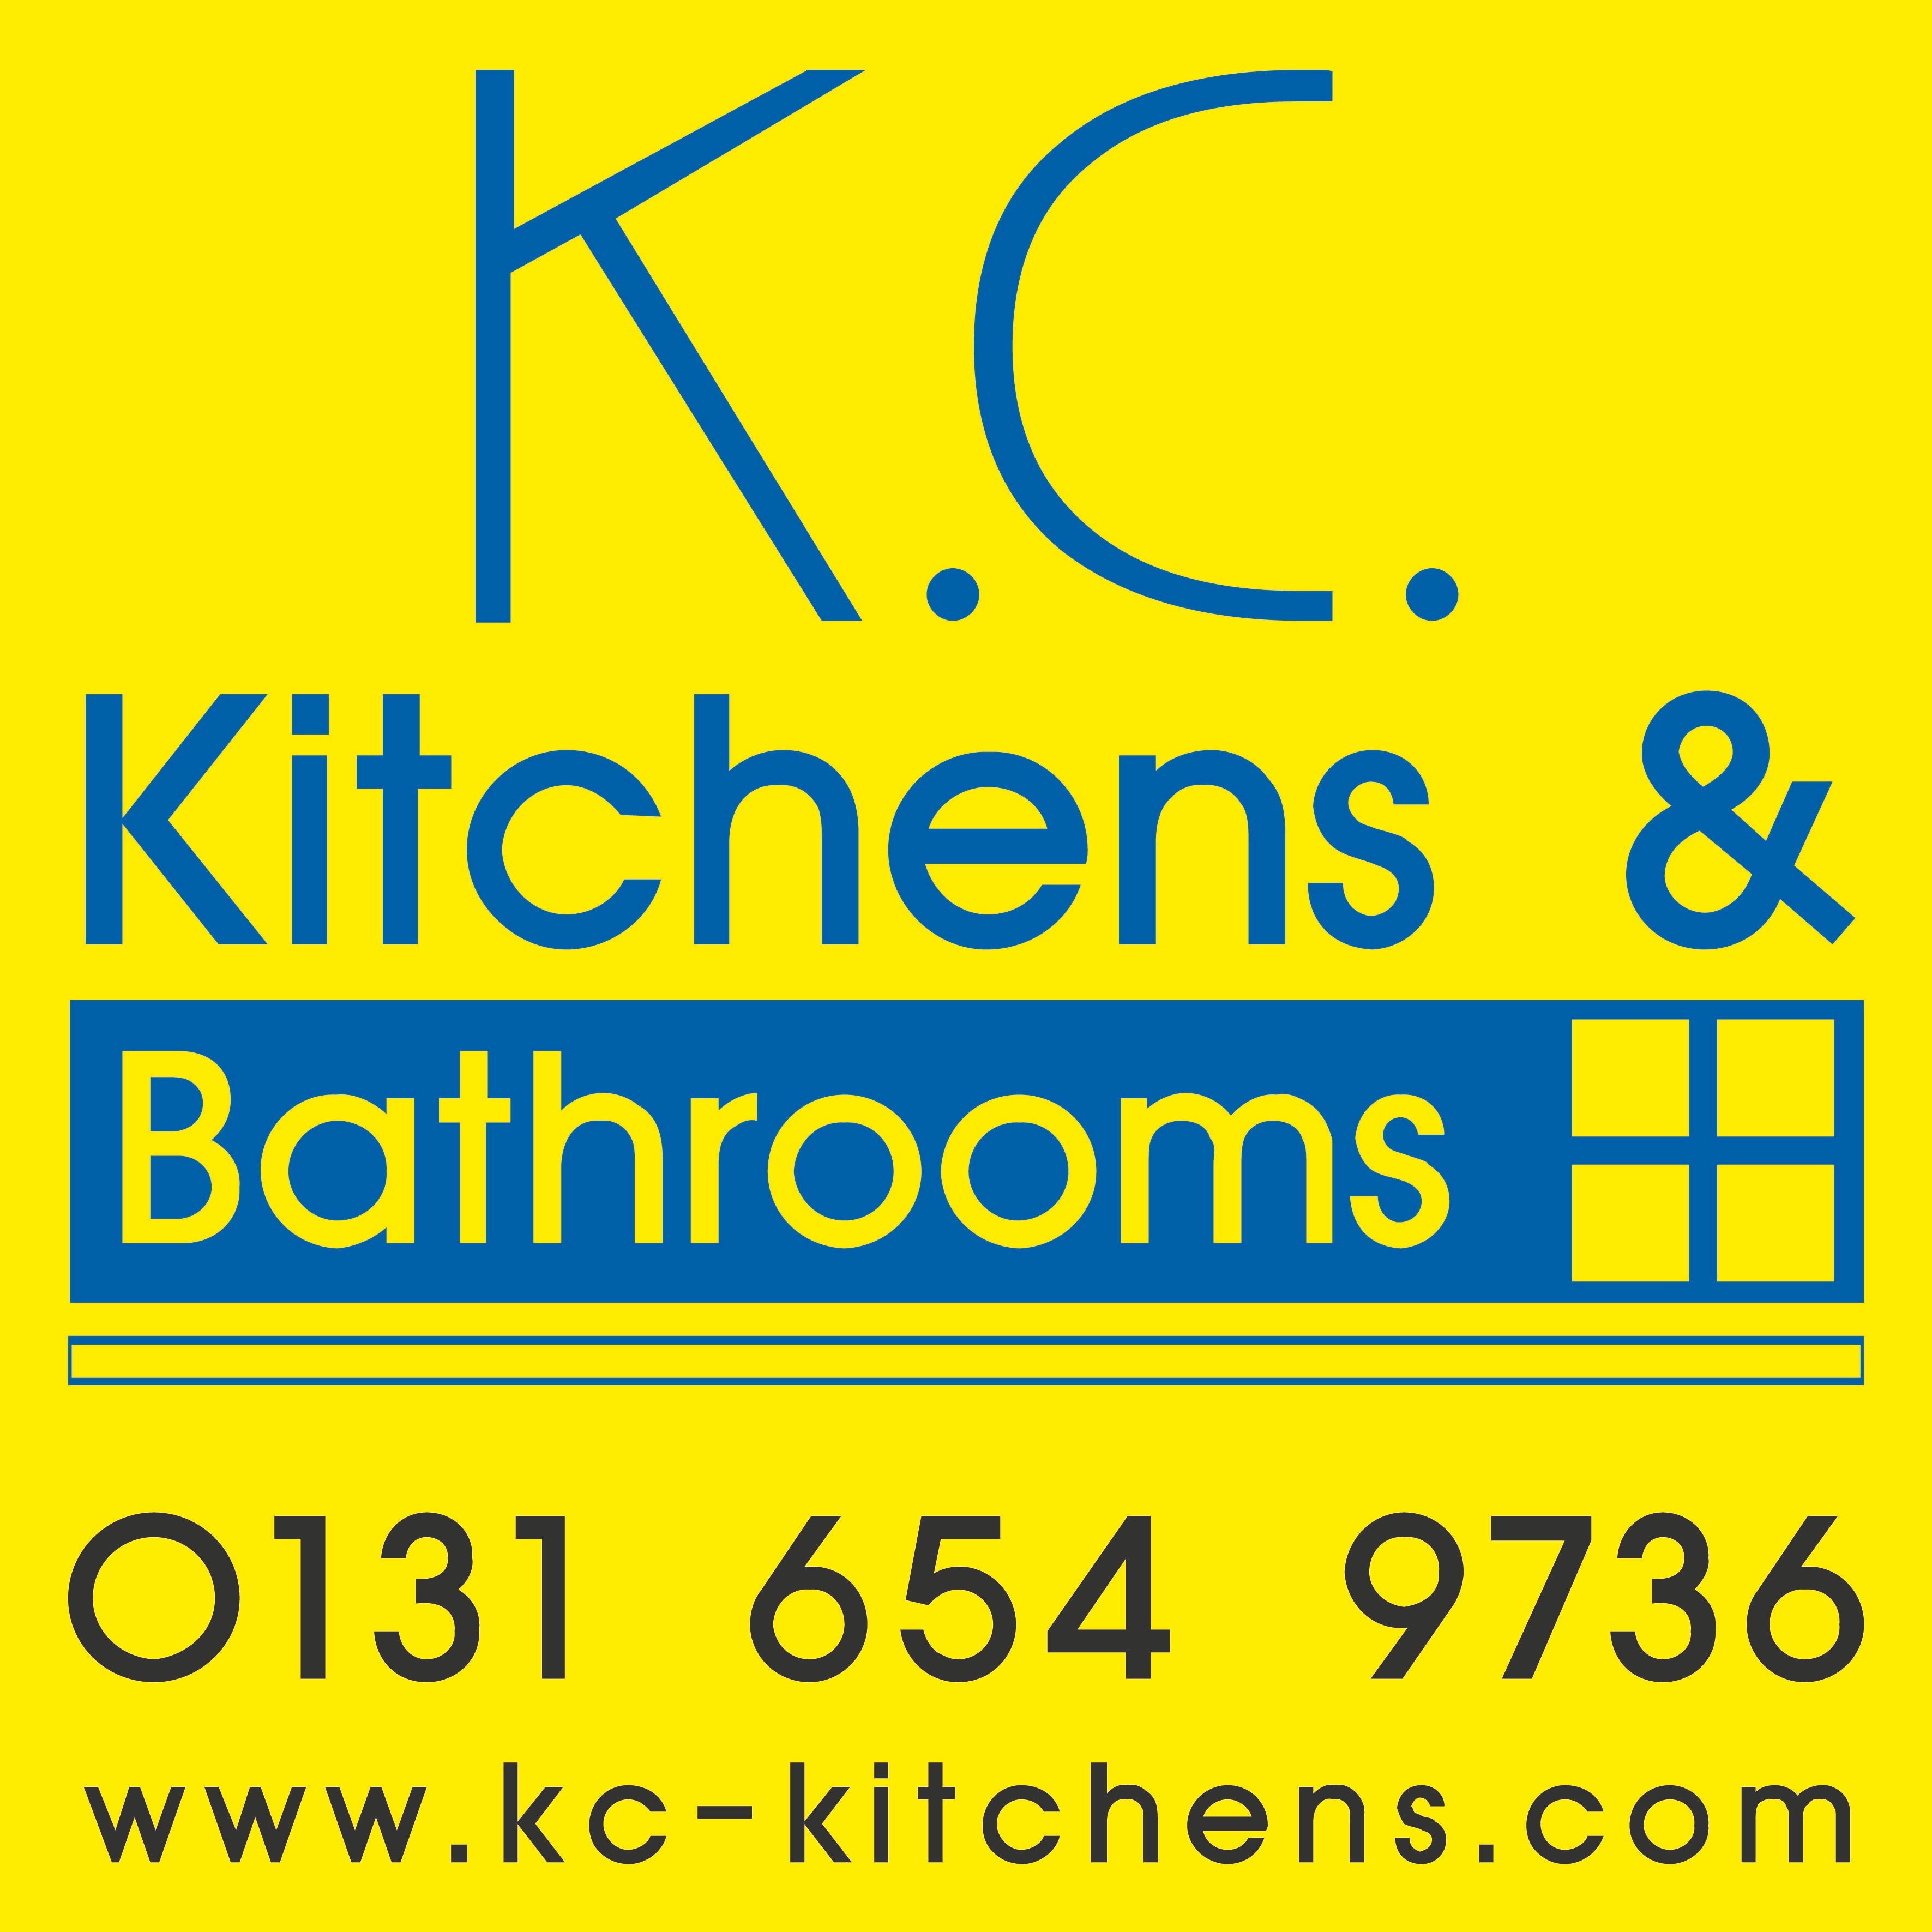 SPONSORS OF THE 18TH TEE - https://www.kc-kitchens.com/